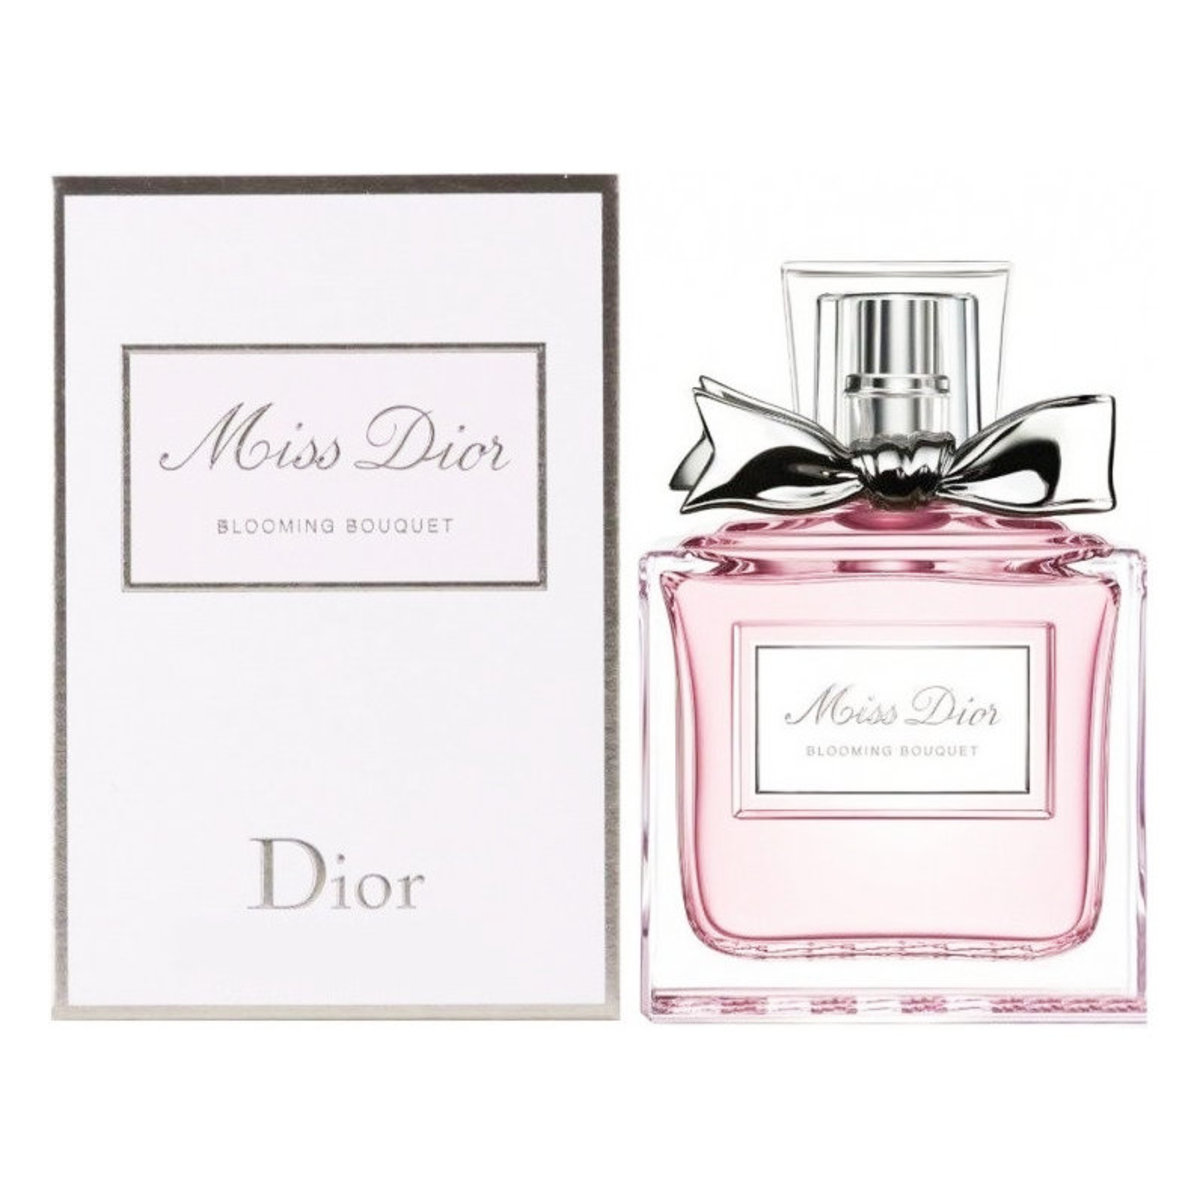 miss dior blooming bouquet black friday